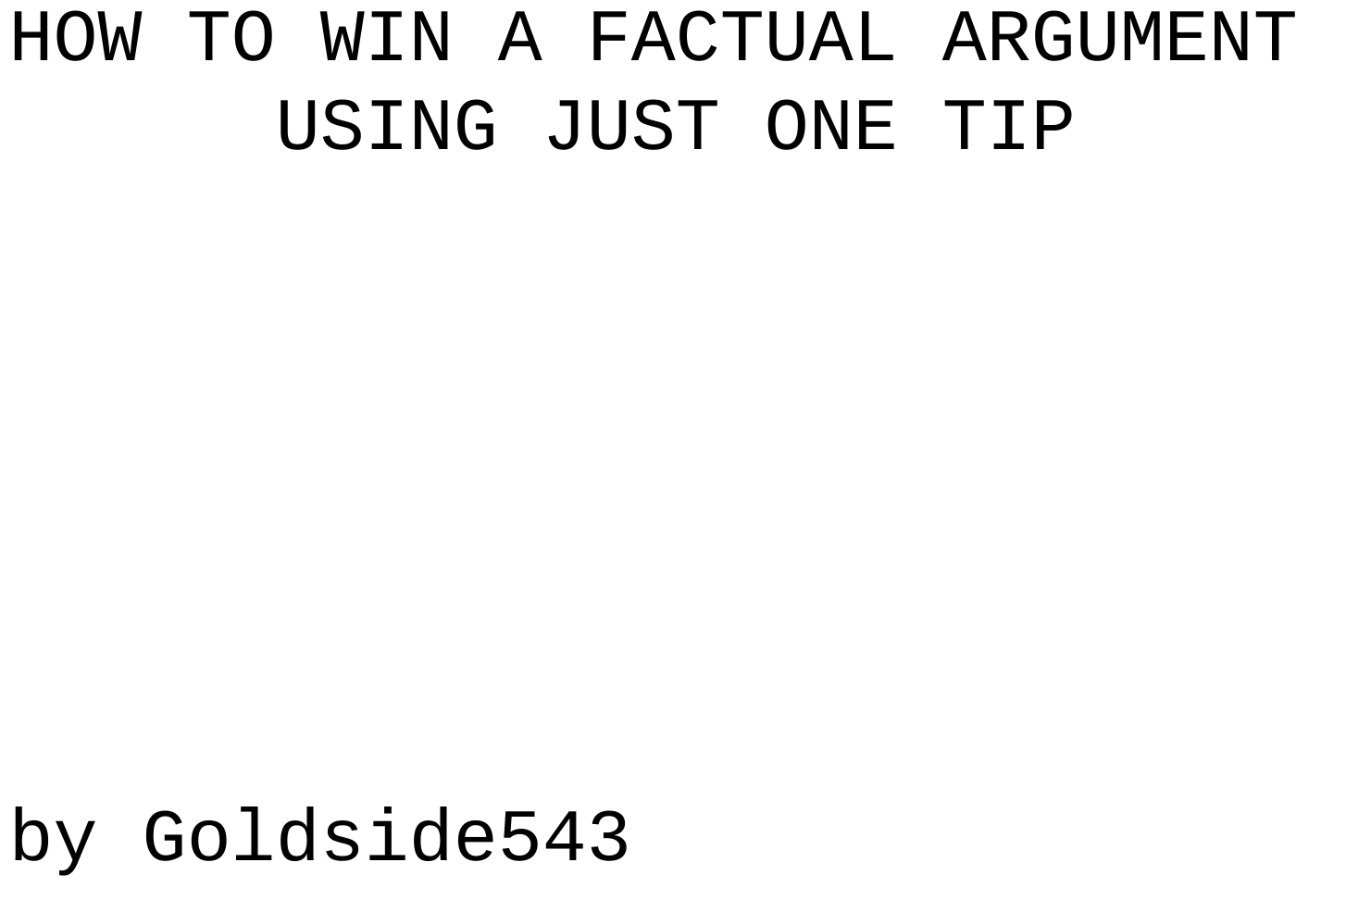 How to Win a Factual Argument using Just One Tip